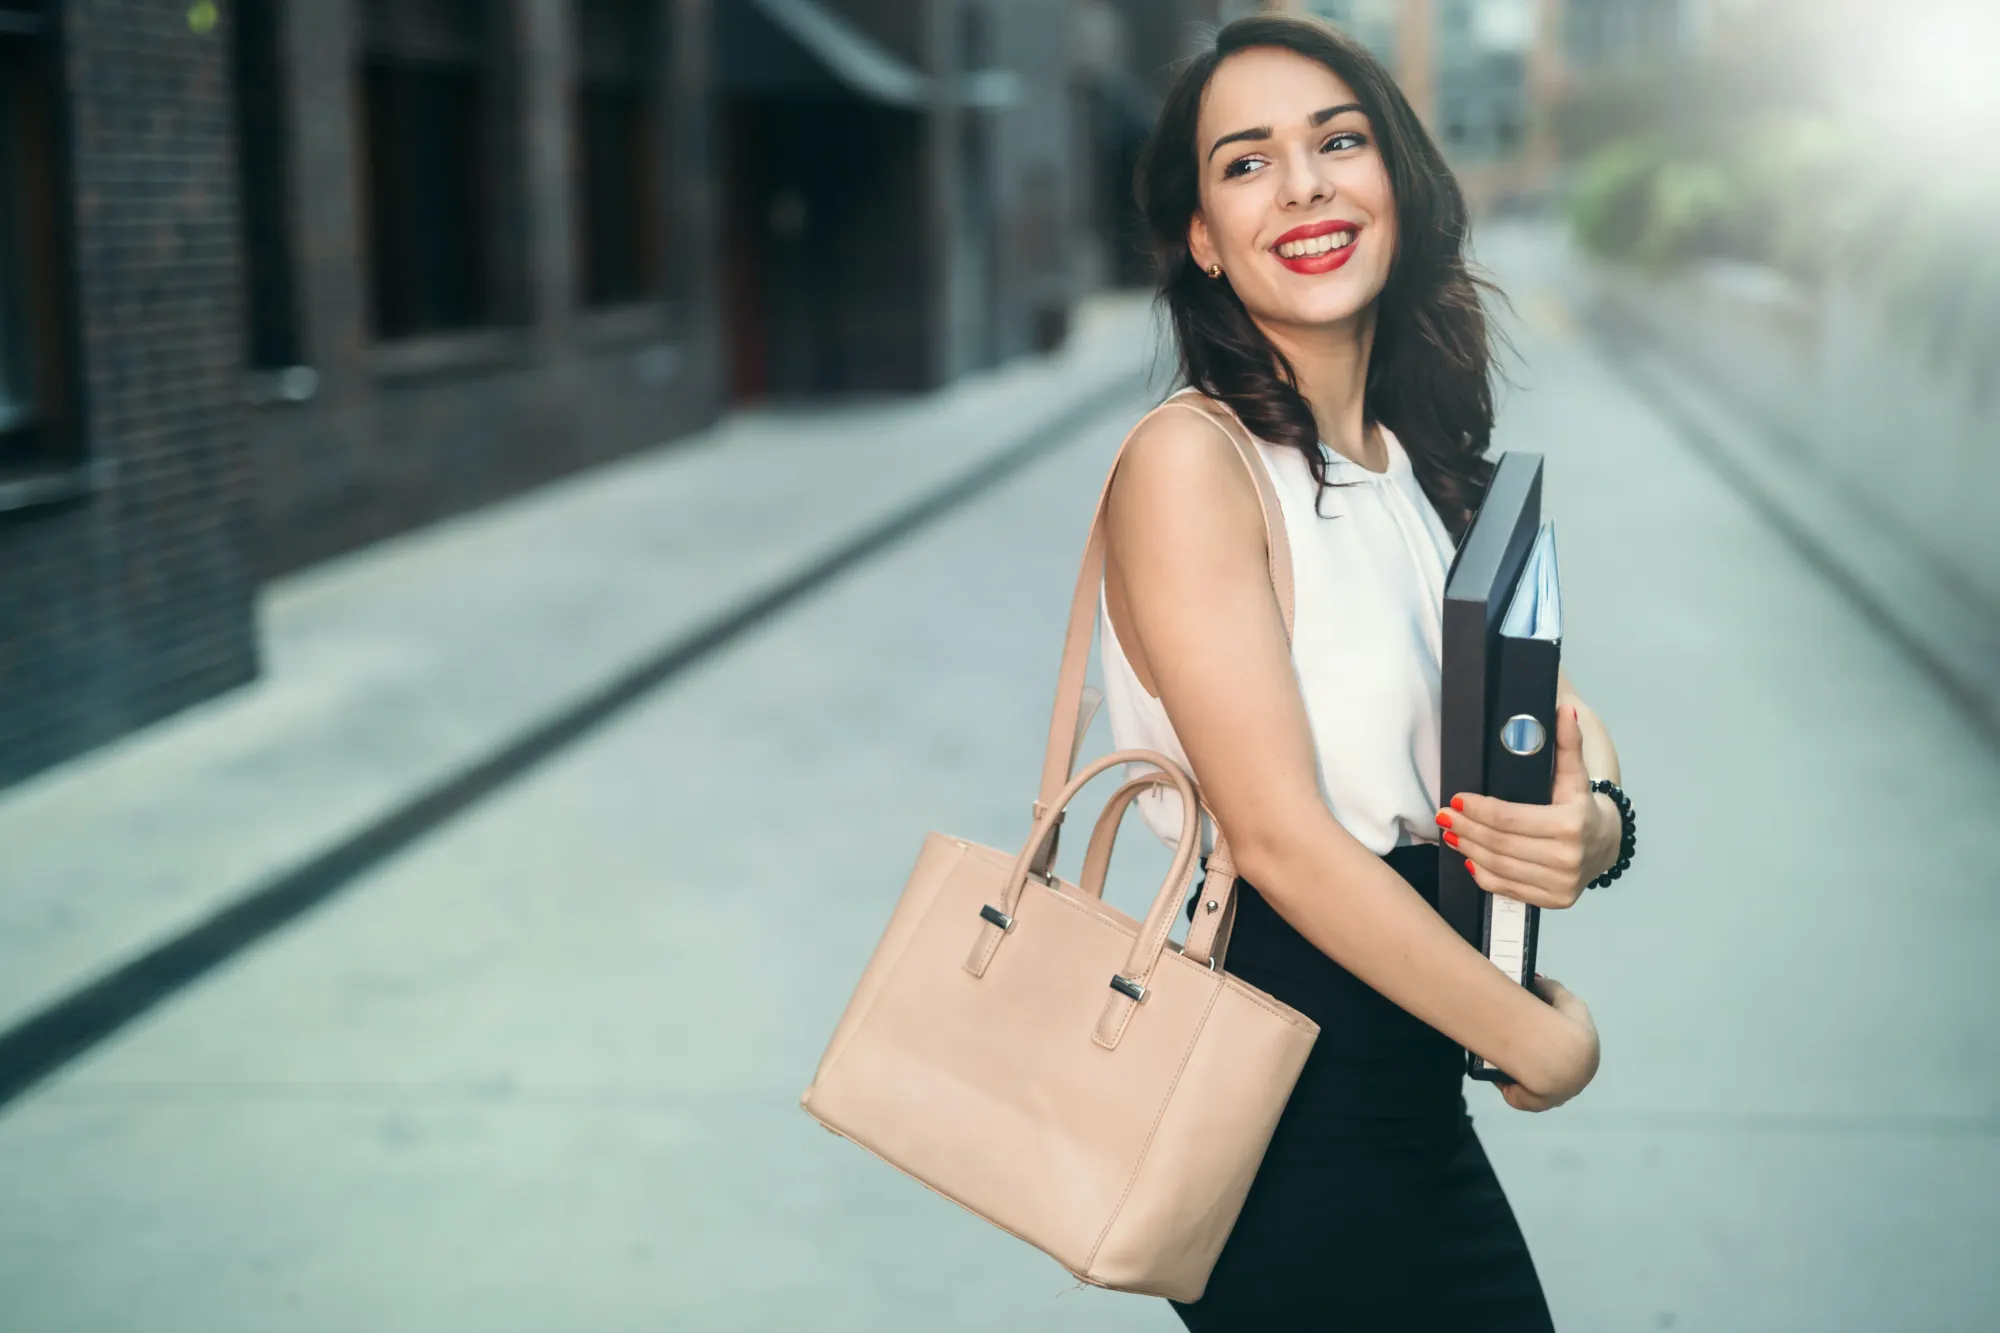 business woman smiling while holding purse and binders